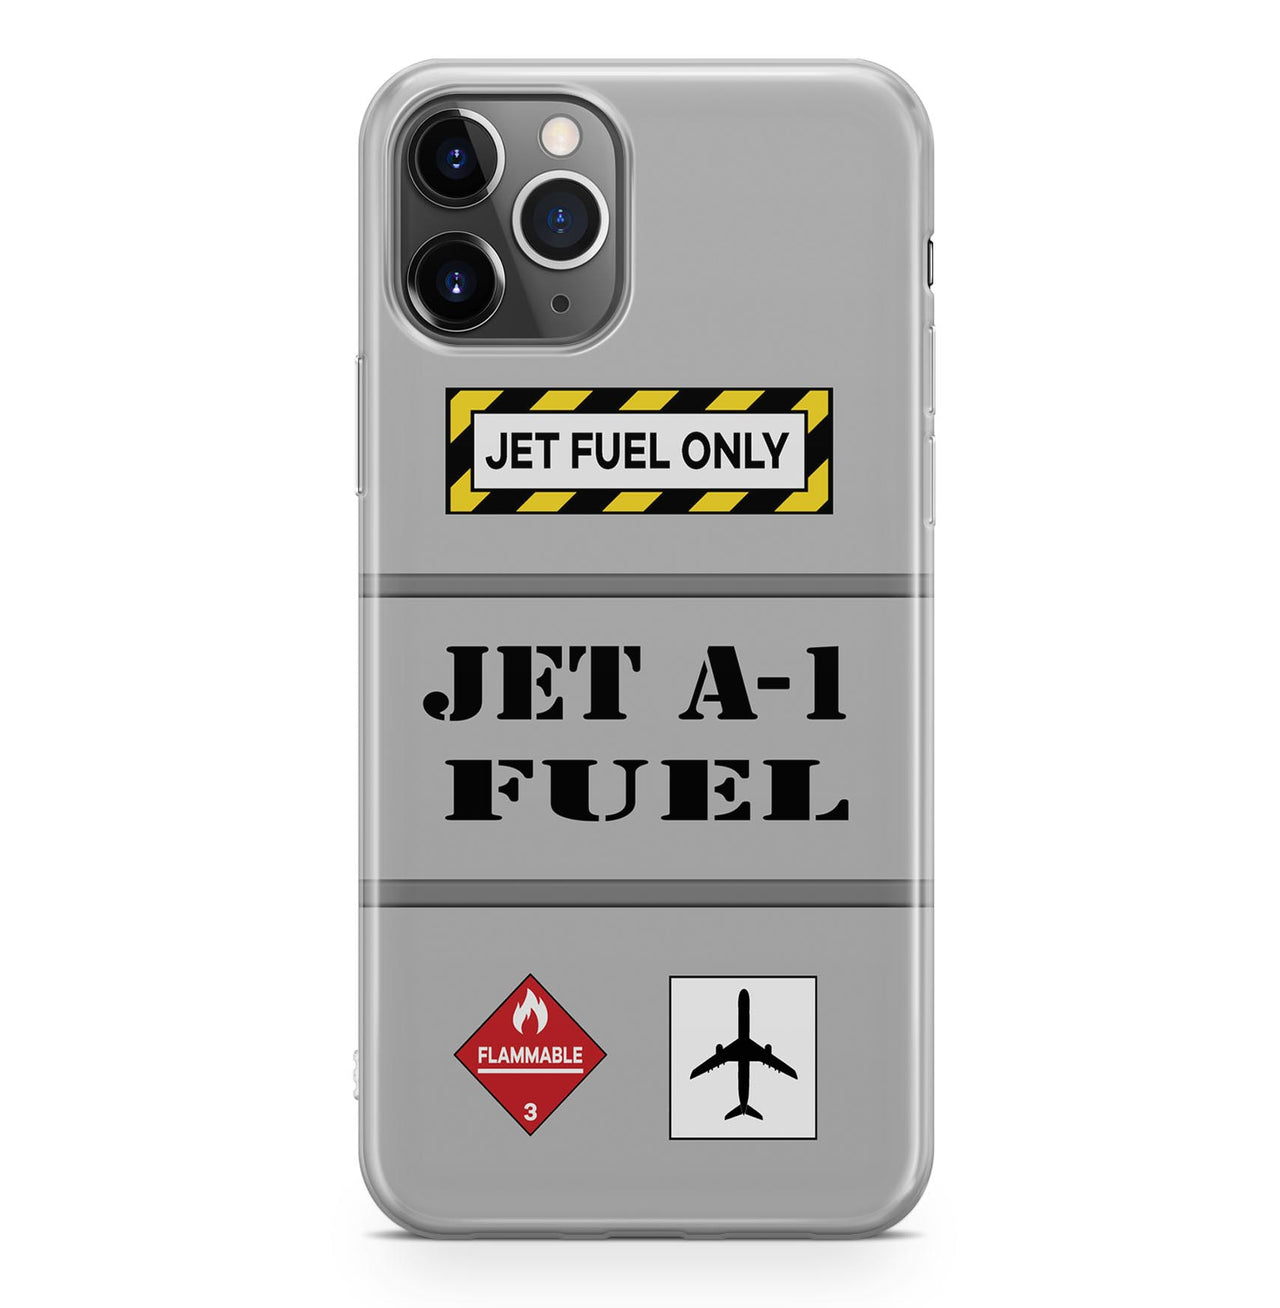 Jet Fuel Only Designed iPhone Cases